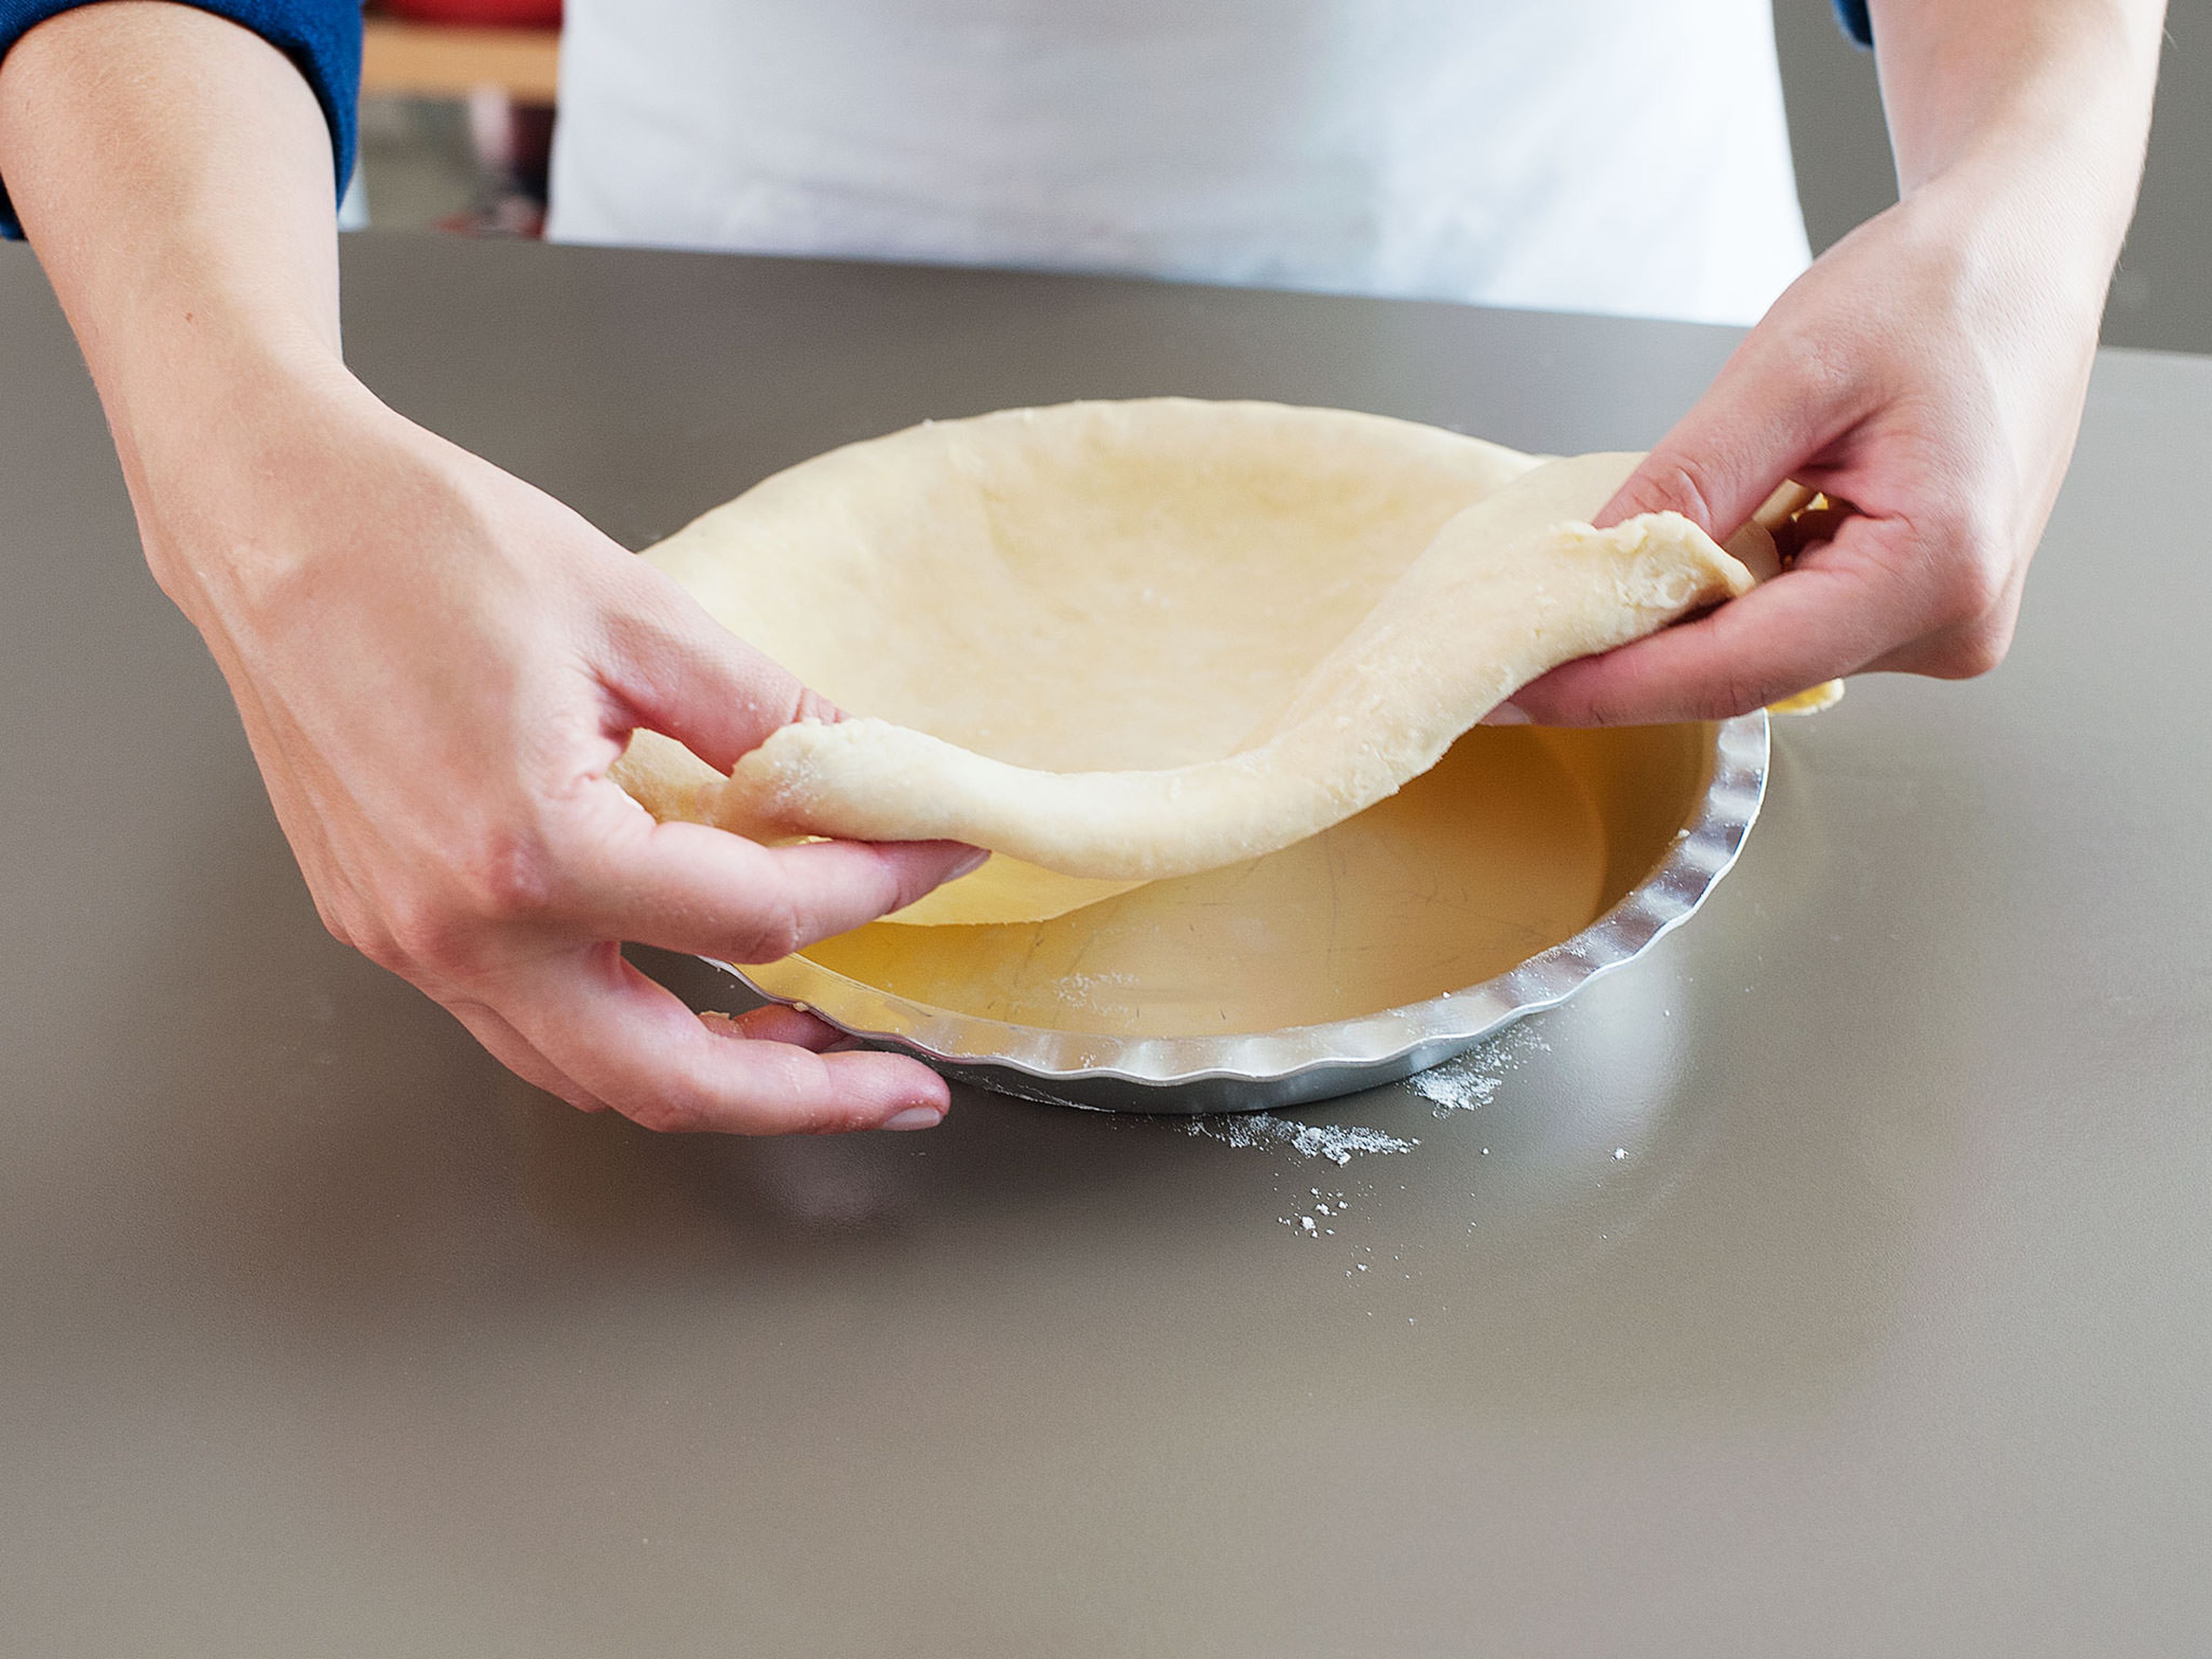 Preheat oven to 190°C/375°F and grease a pie dish (9-inch/23-cm.) Take dough out of refrigerator and let warm up for a few minutes. On a lightly floured work surface, roll one disc into a 0.25-in./0.5-cm thick round. Transfer the round to the pie dish, letting the excess hang over the edge, and distribute cherry filling evenly on top.